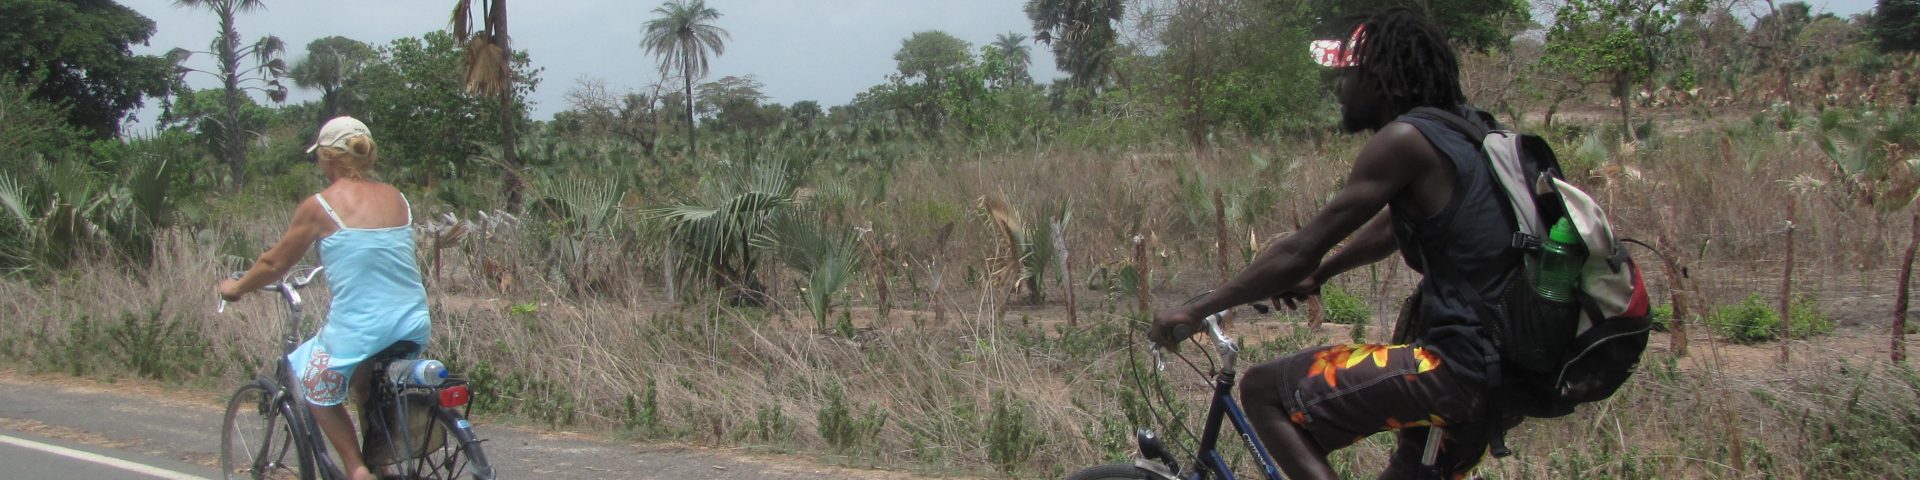 CYCLING IN THE GAMBIA